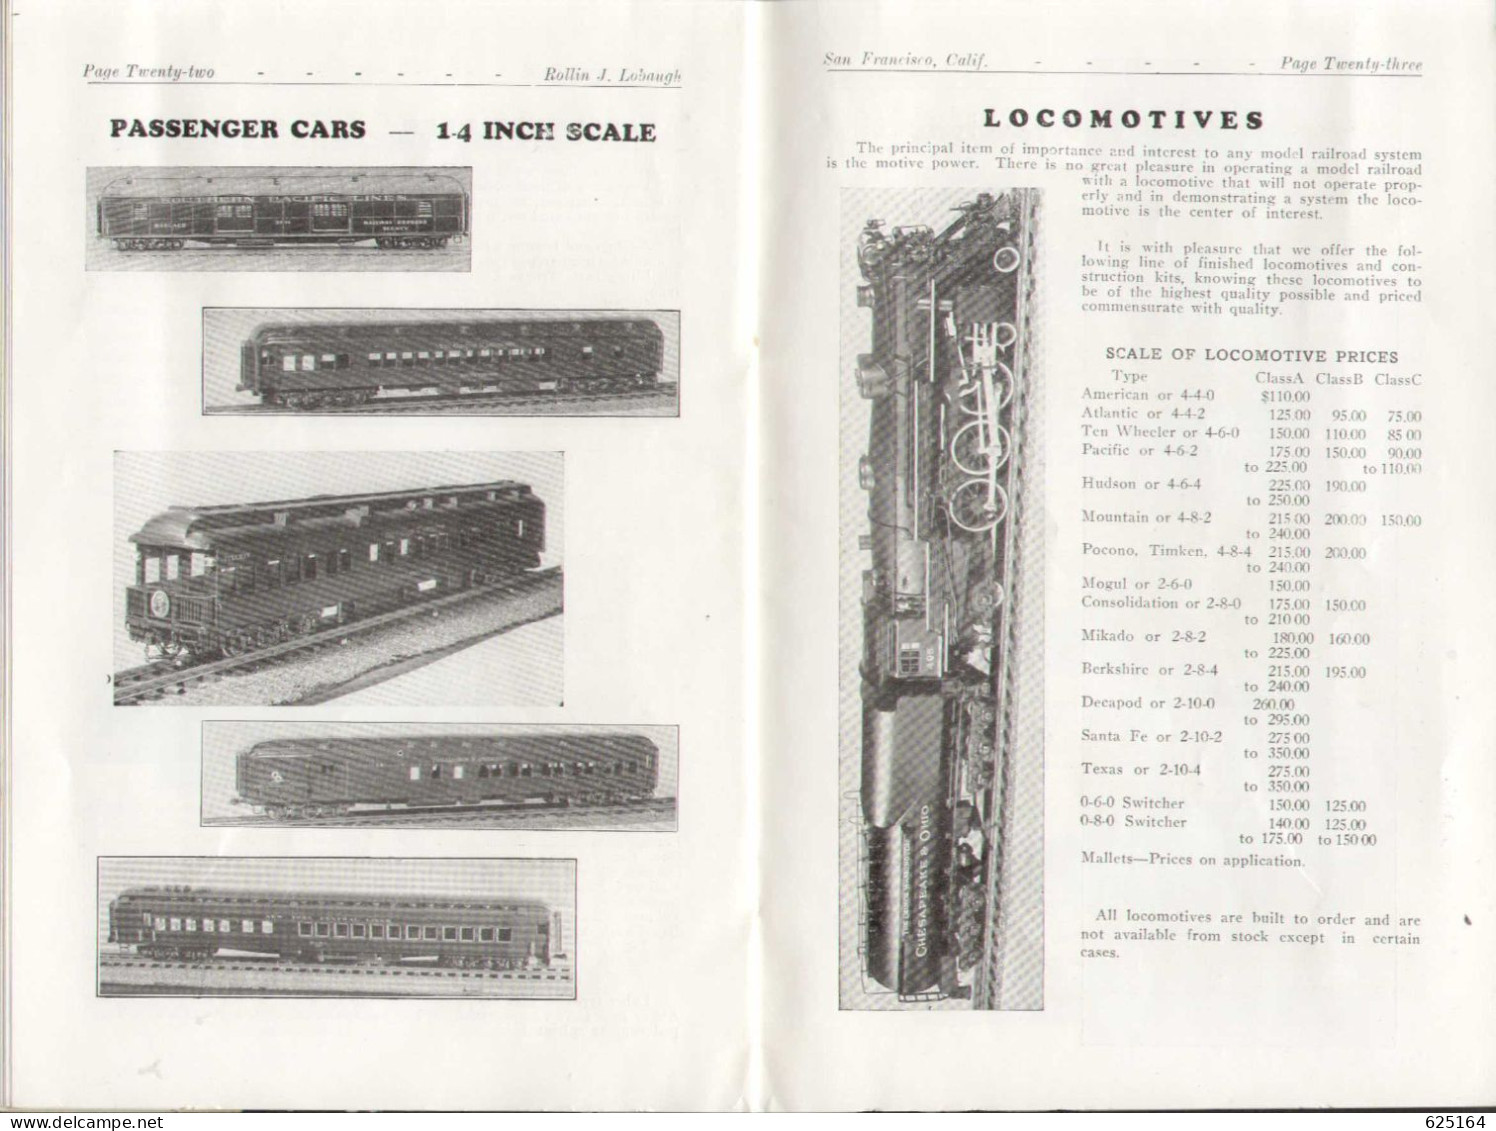 Catalogue LOBAUGH ROLLING J. 1934/35 MODEL RAILROAD EQUIPMENT AND SUPPLIES 1-4 INCH SCALE - Anglais